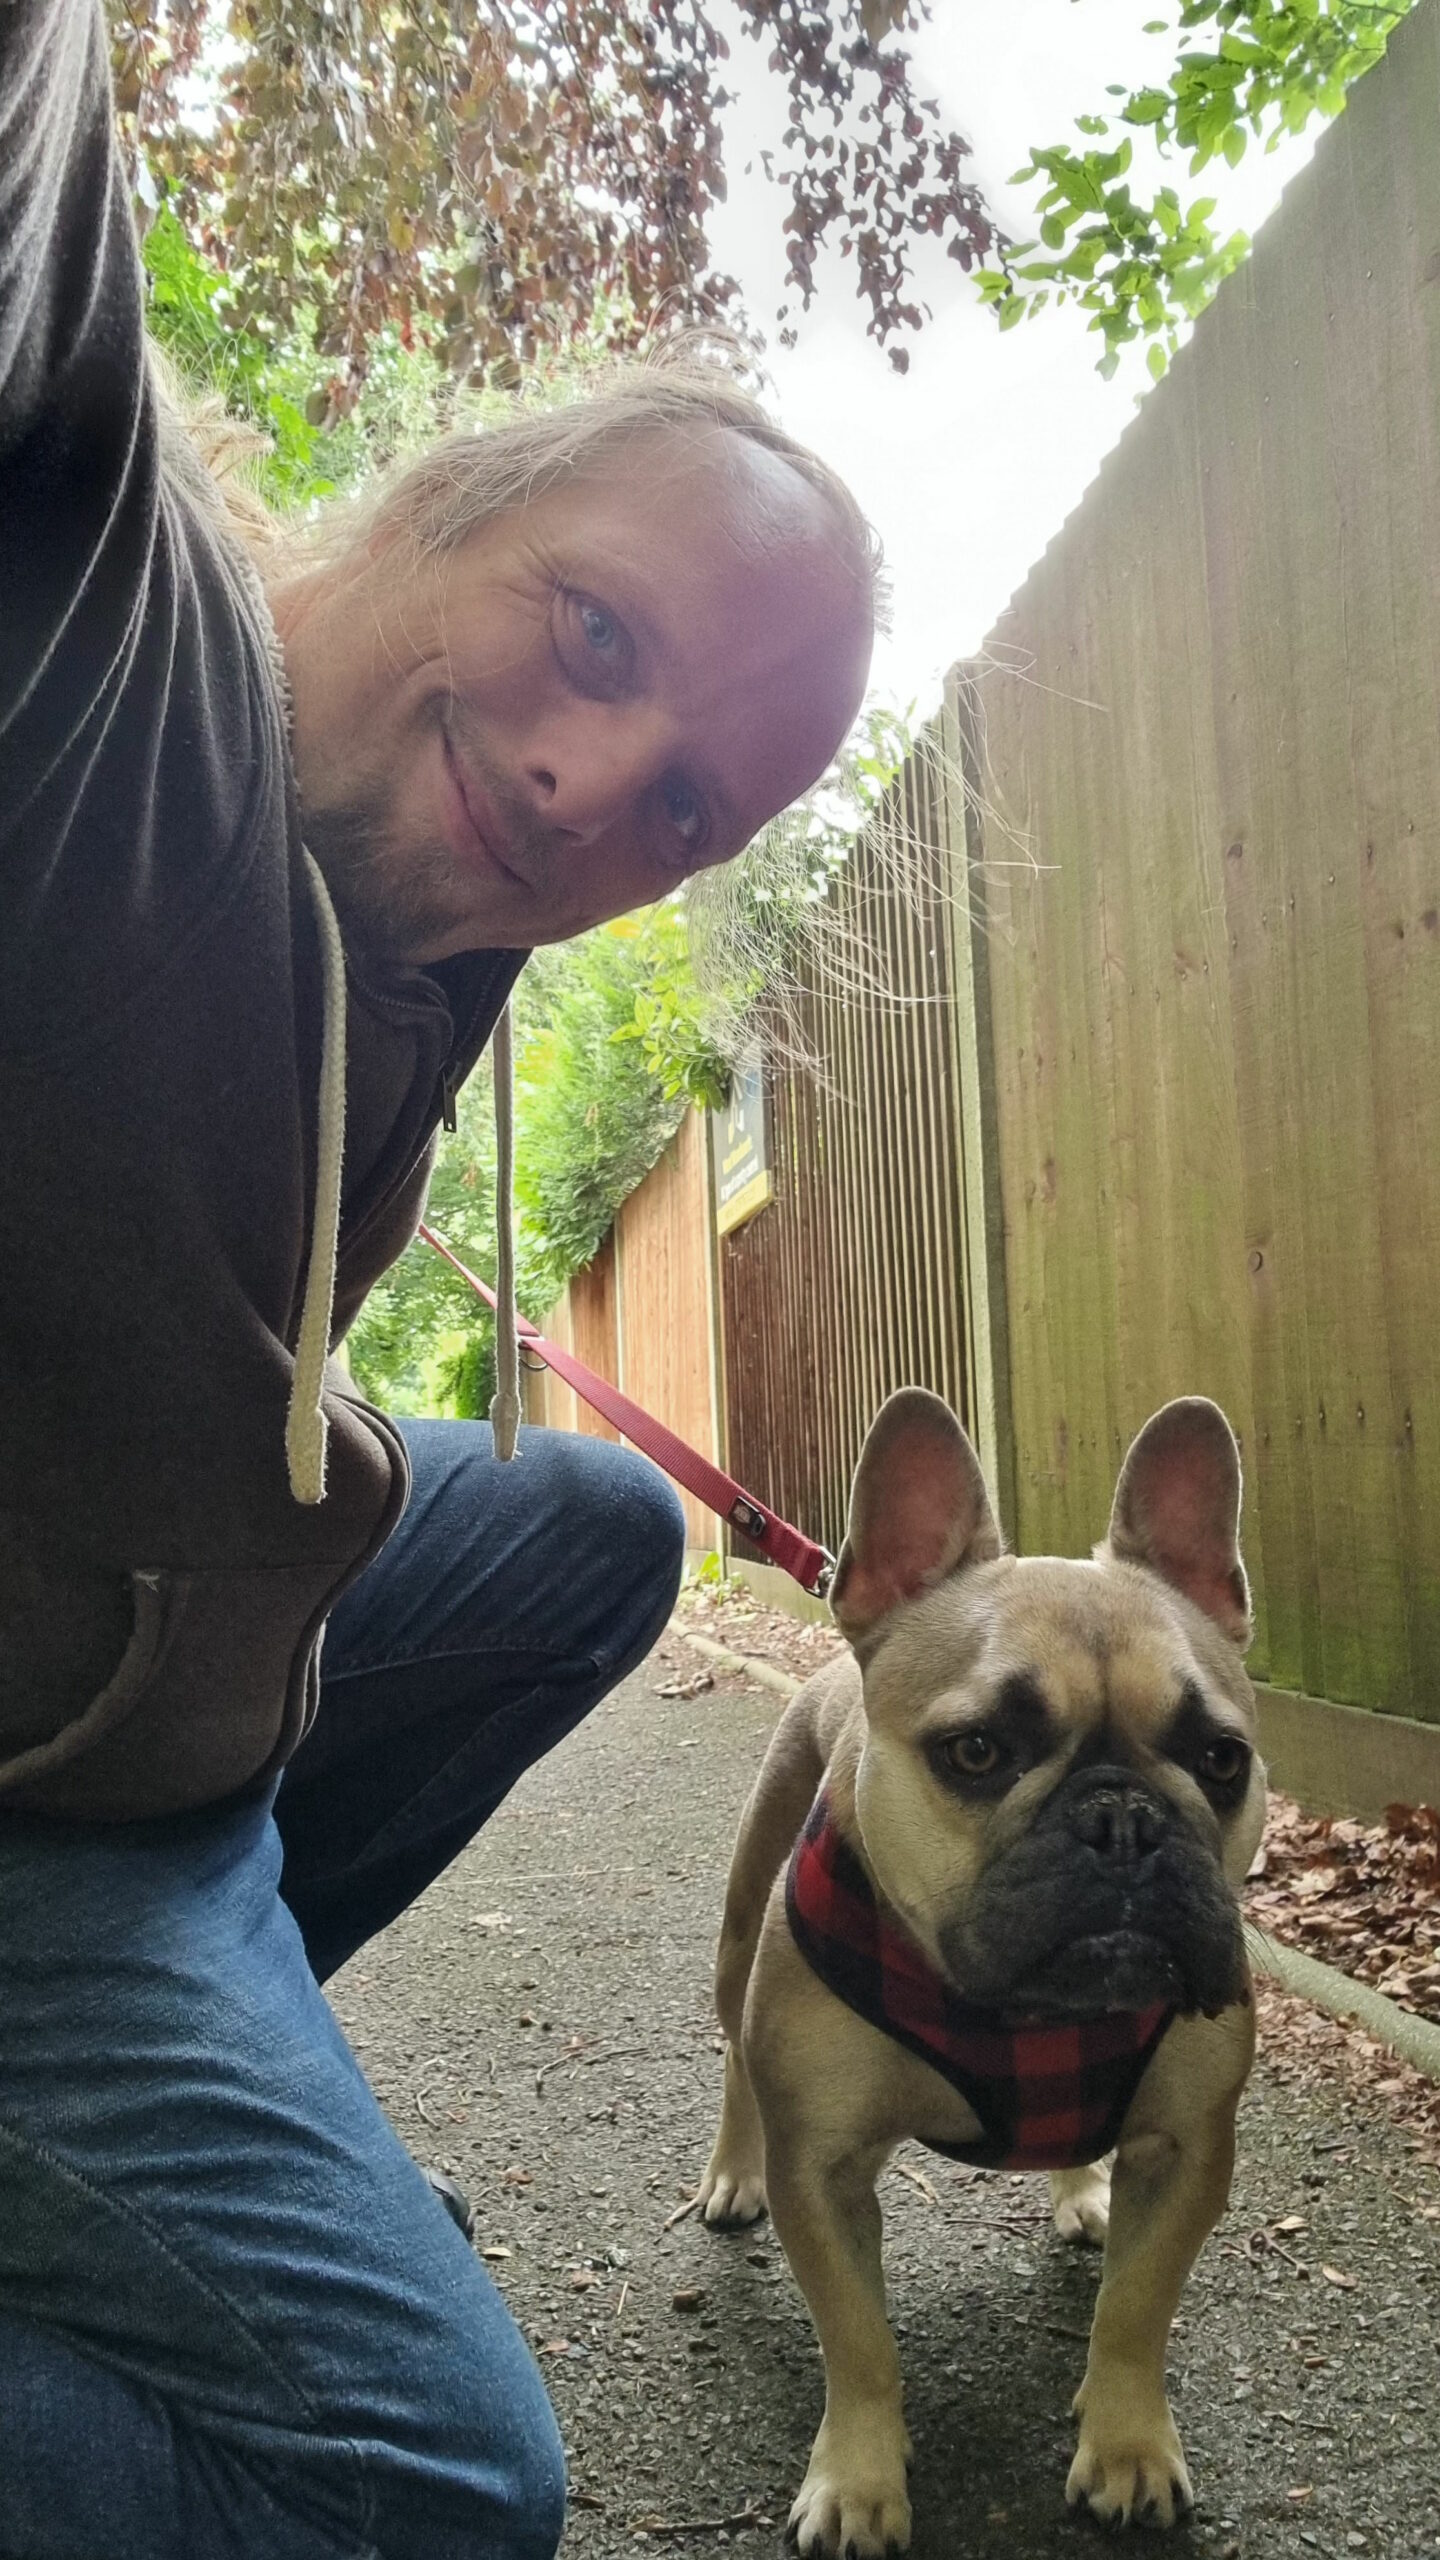 Dan, wearing blue jeans and a grey hoodie, kneels alongside Demmy, a French Bulldog, on a dirt path between a forest and the wooden fences at the edge of some gardens.